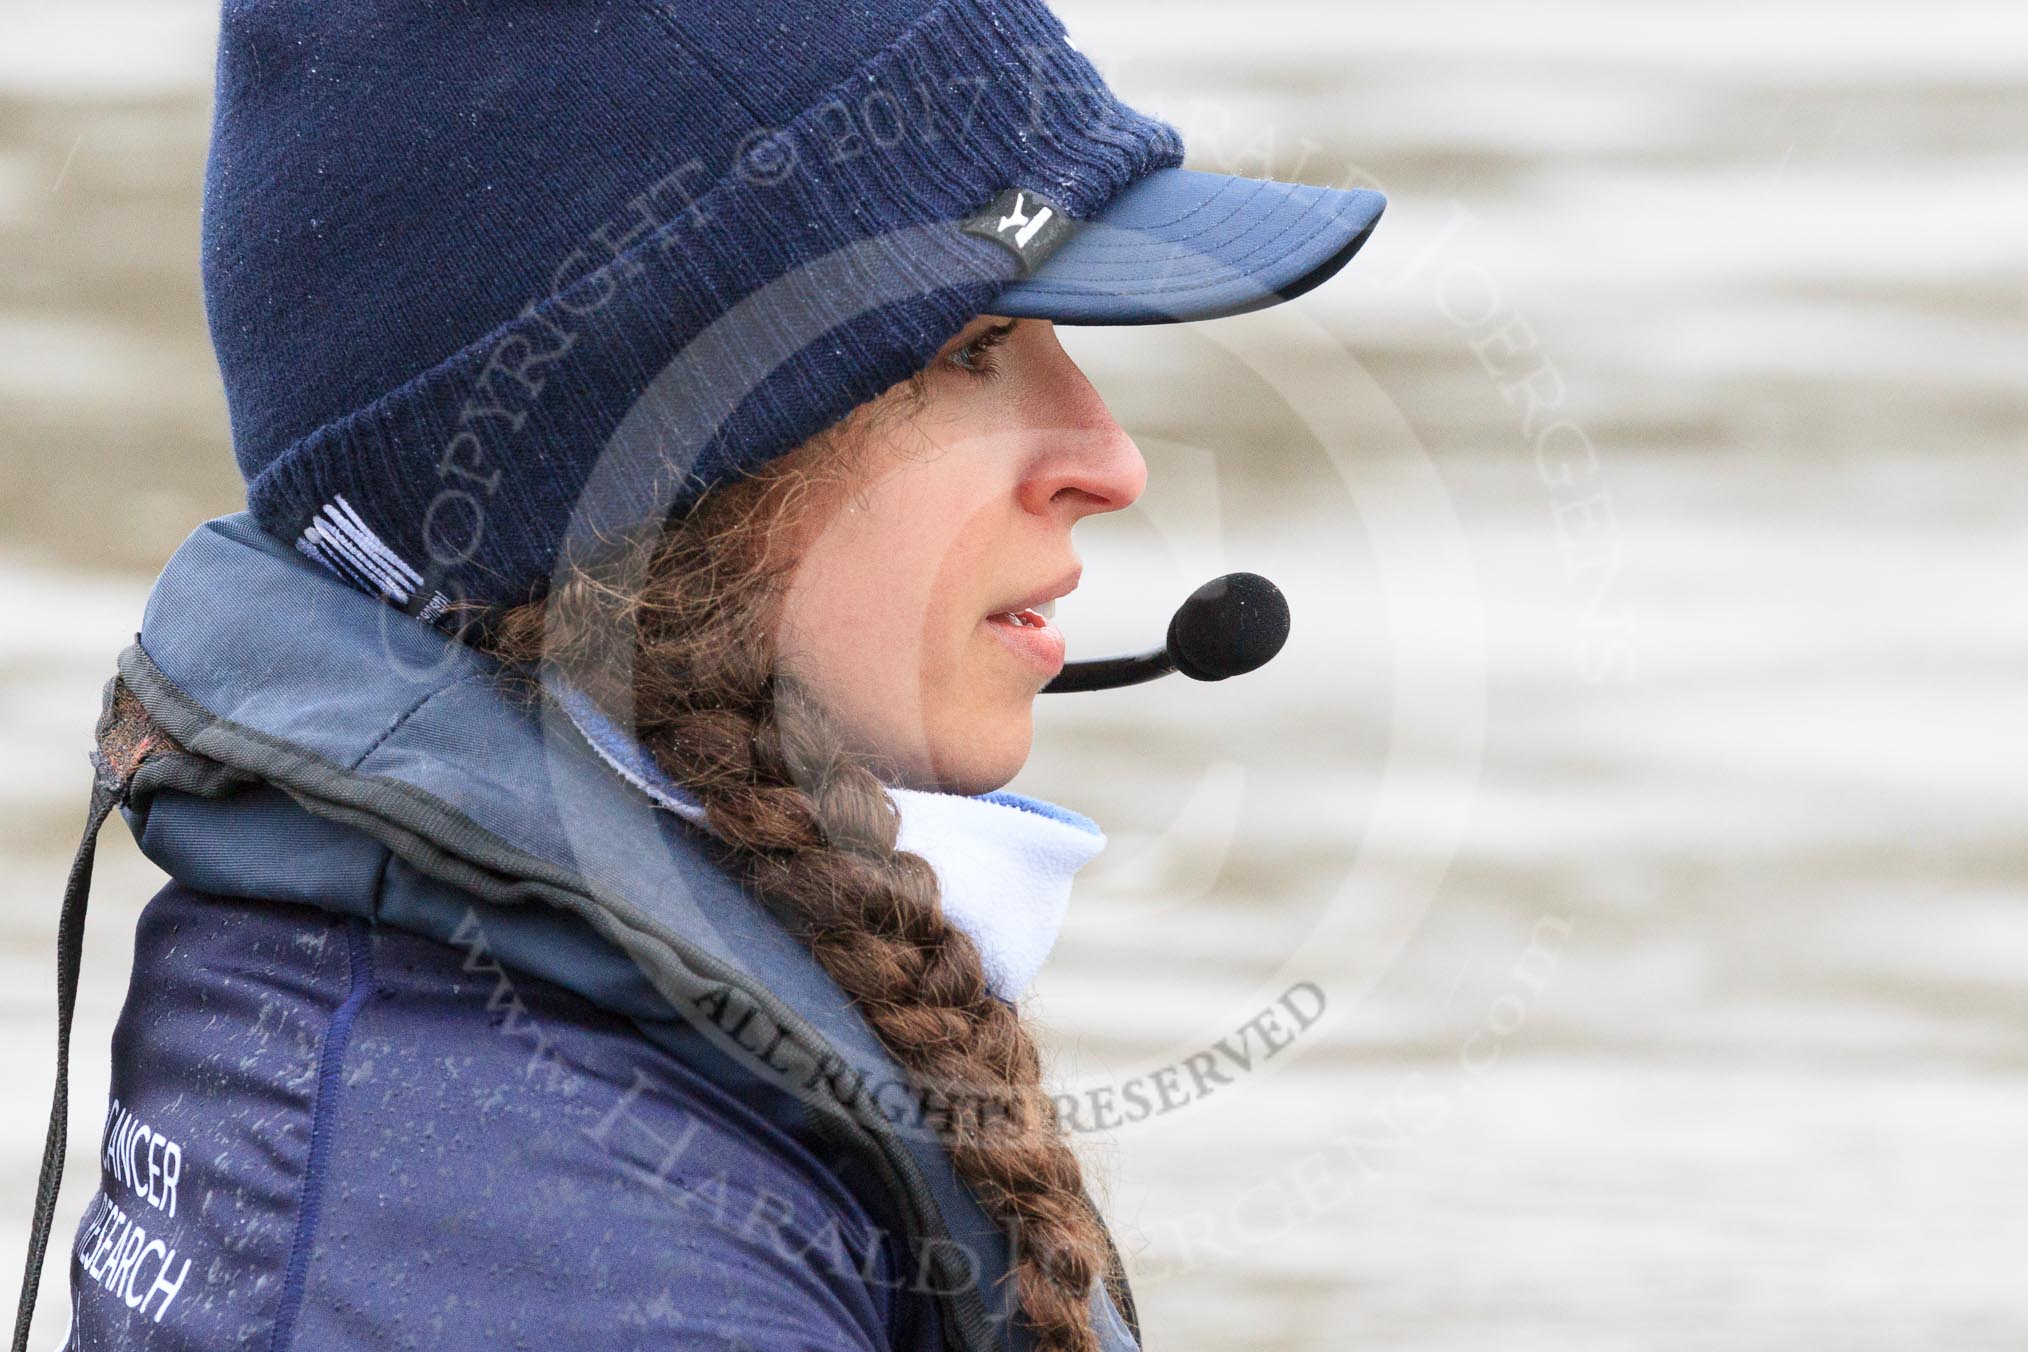 The Boat Race season 2018 - Women's Boat Race Trial Eights (OUWBC, Oxford): Close-up of "Coursing River" cox Ellie Shearer.
River Thames between Putney Bridge and Mortlake,
London SW15,

United Kingdom,
on 21 January 2018 at 13:48, image #7